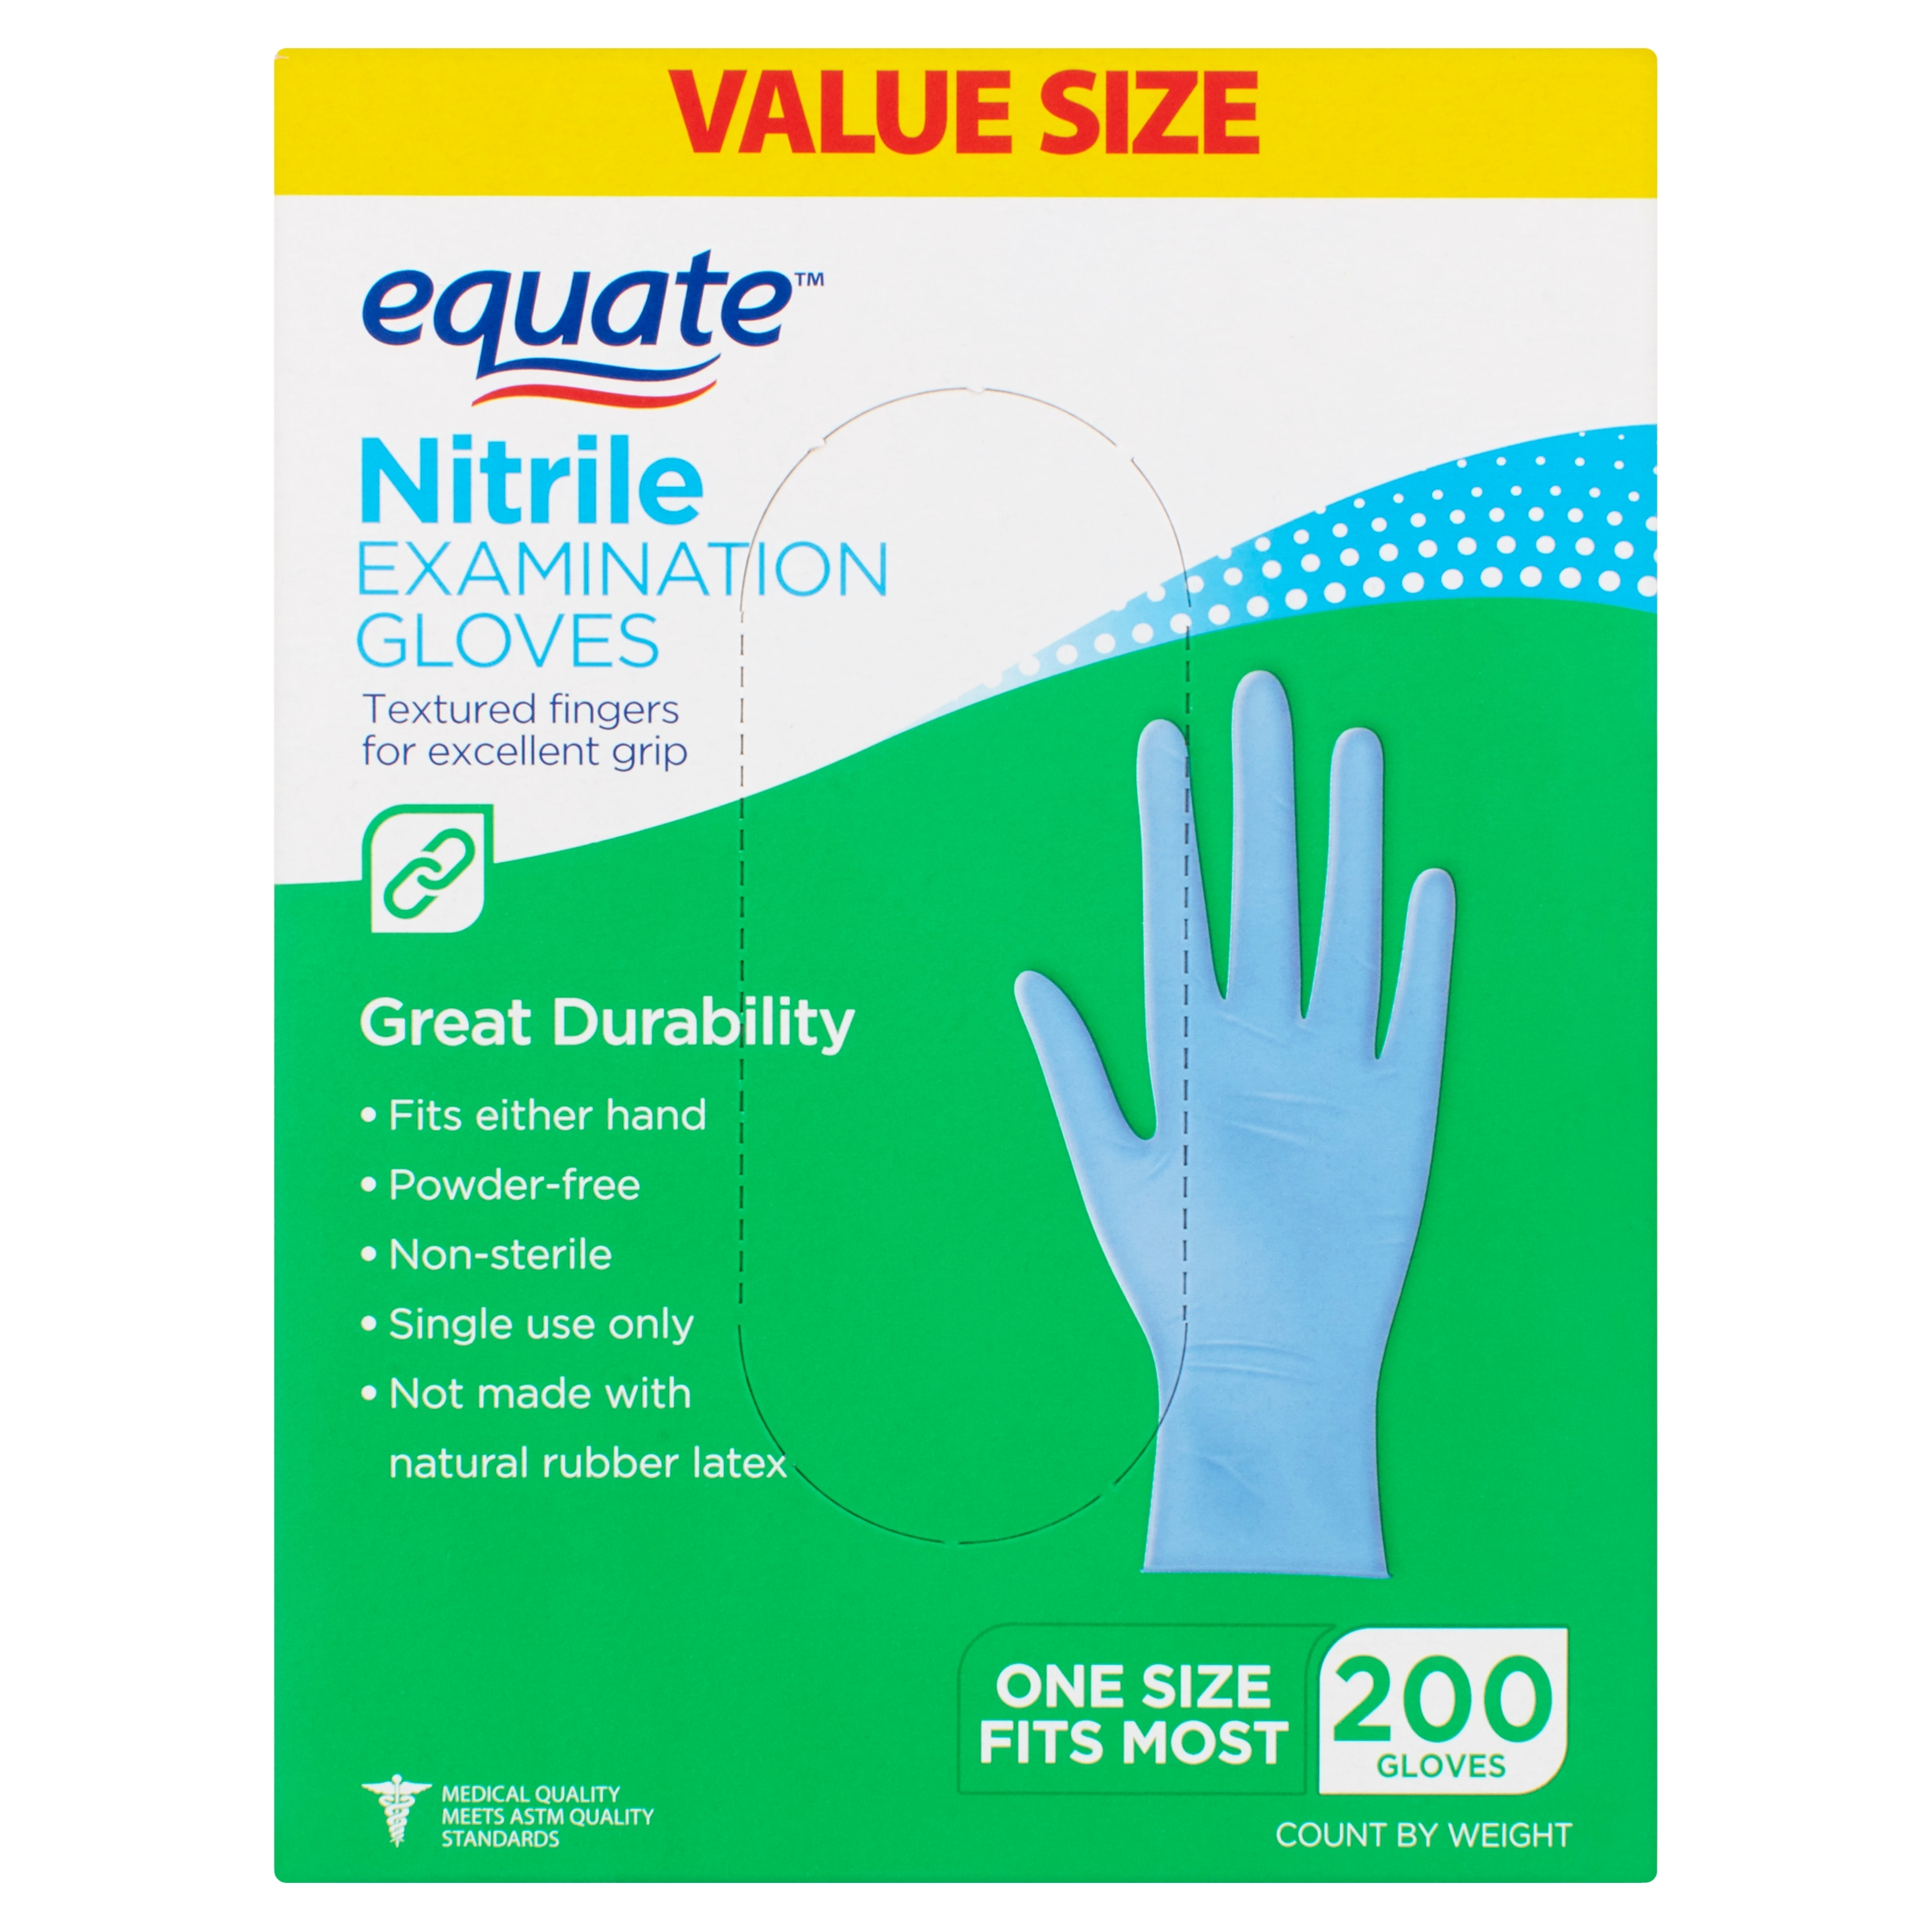 Equate Nitrile Examination Gloves Value Size, 200 count - image 3 of 10